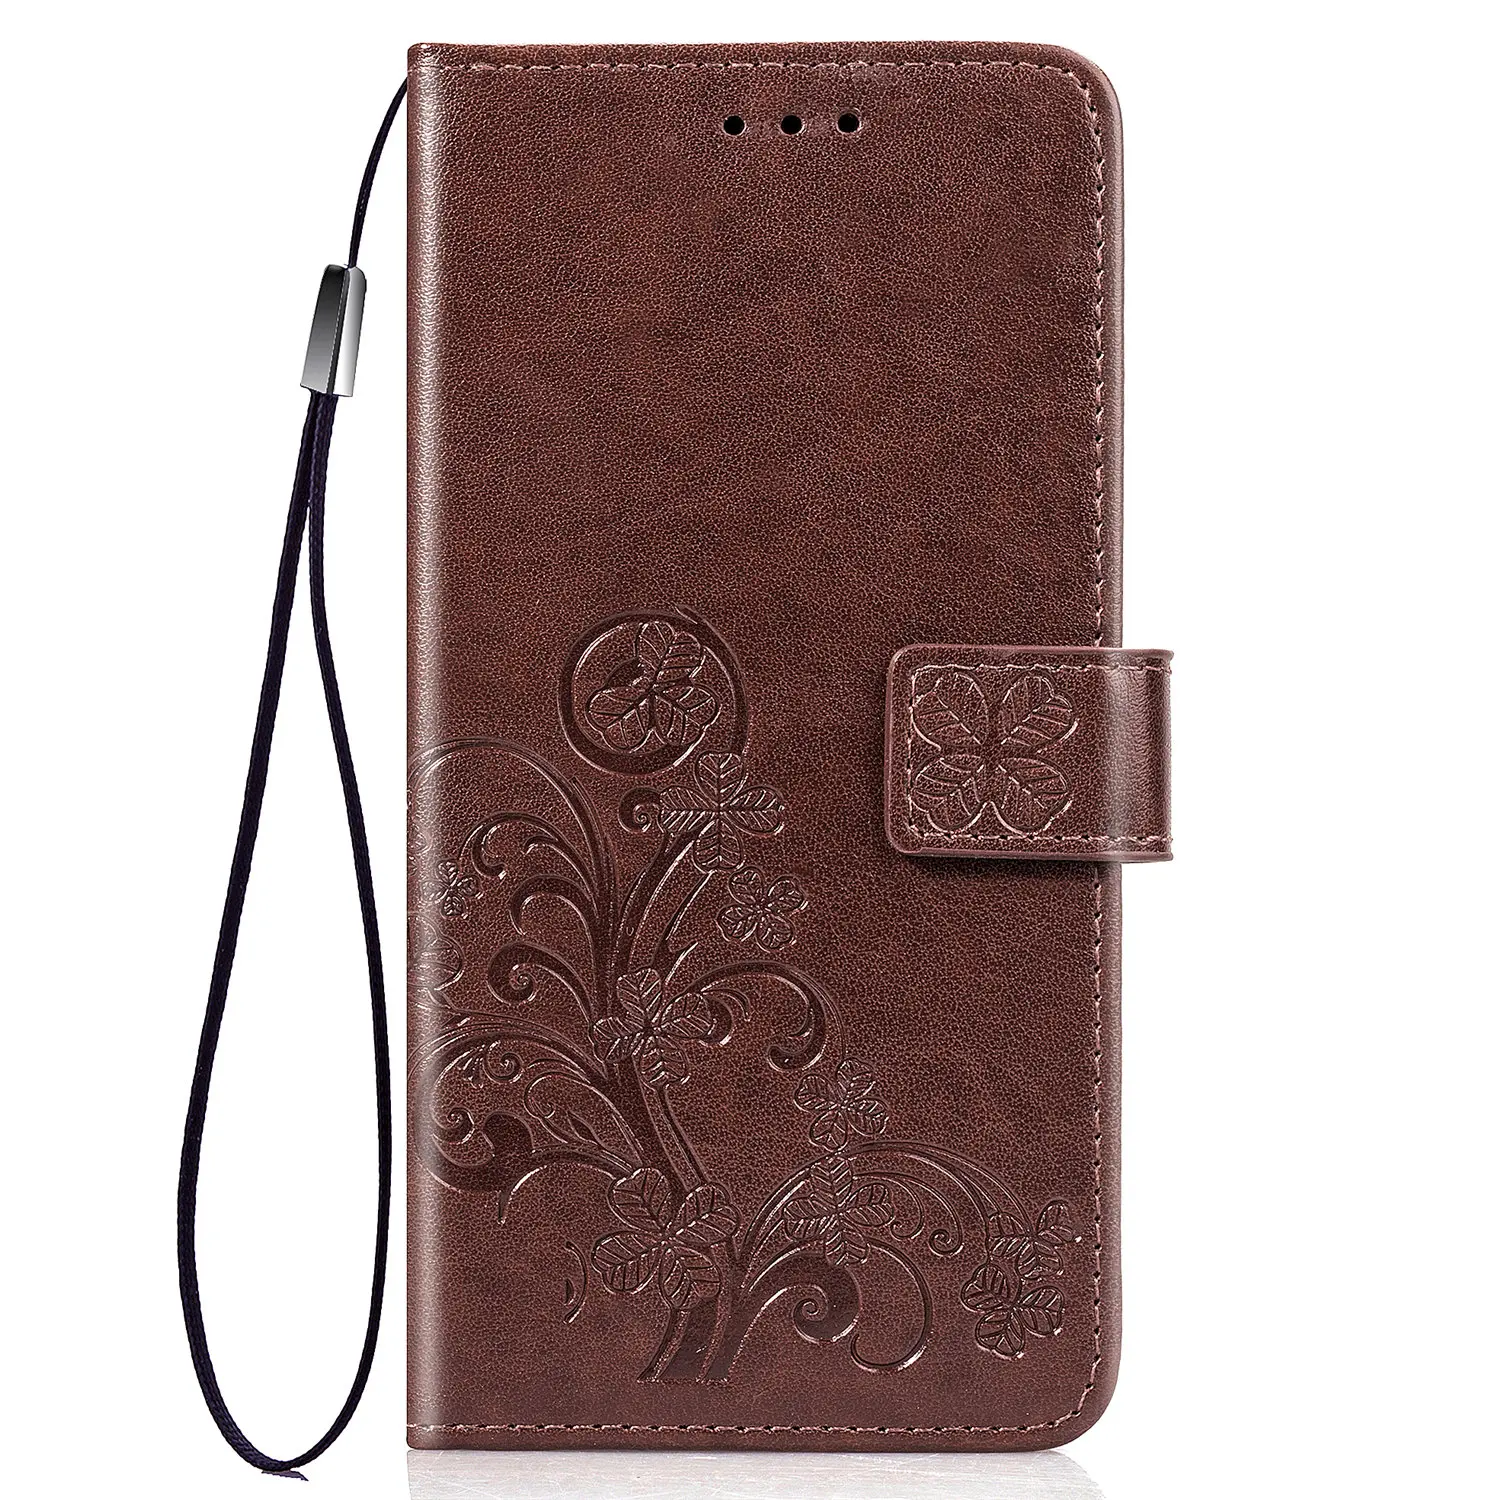 Case for LG X Power K220DS XPower K220 Flip Phone Leather Cover for LG X Power K210 K 210 220DS 220 ds Coque Phone Bags